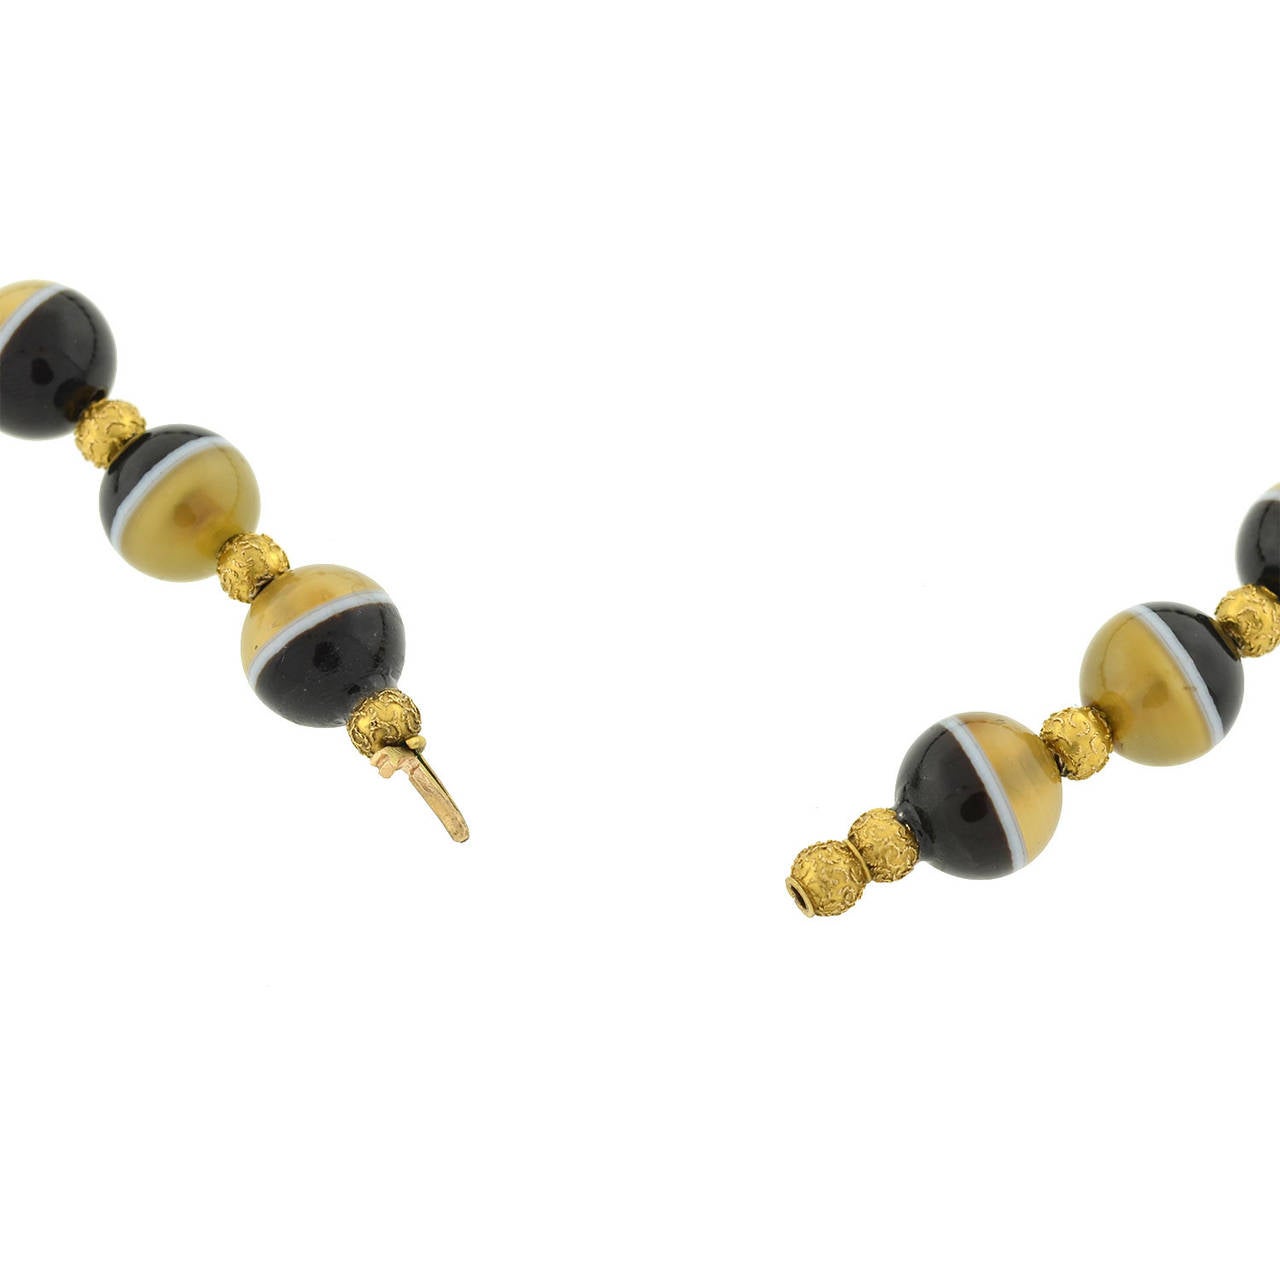 A rare honey banded agate necklace from the Victorian (ca1880) era! A strand of honey banded agate beads alternates with vibrant 18kt yellow gold Etruscan bead spacers to form this beautiful necklace. All of the honey banded agate beads are smoothly